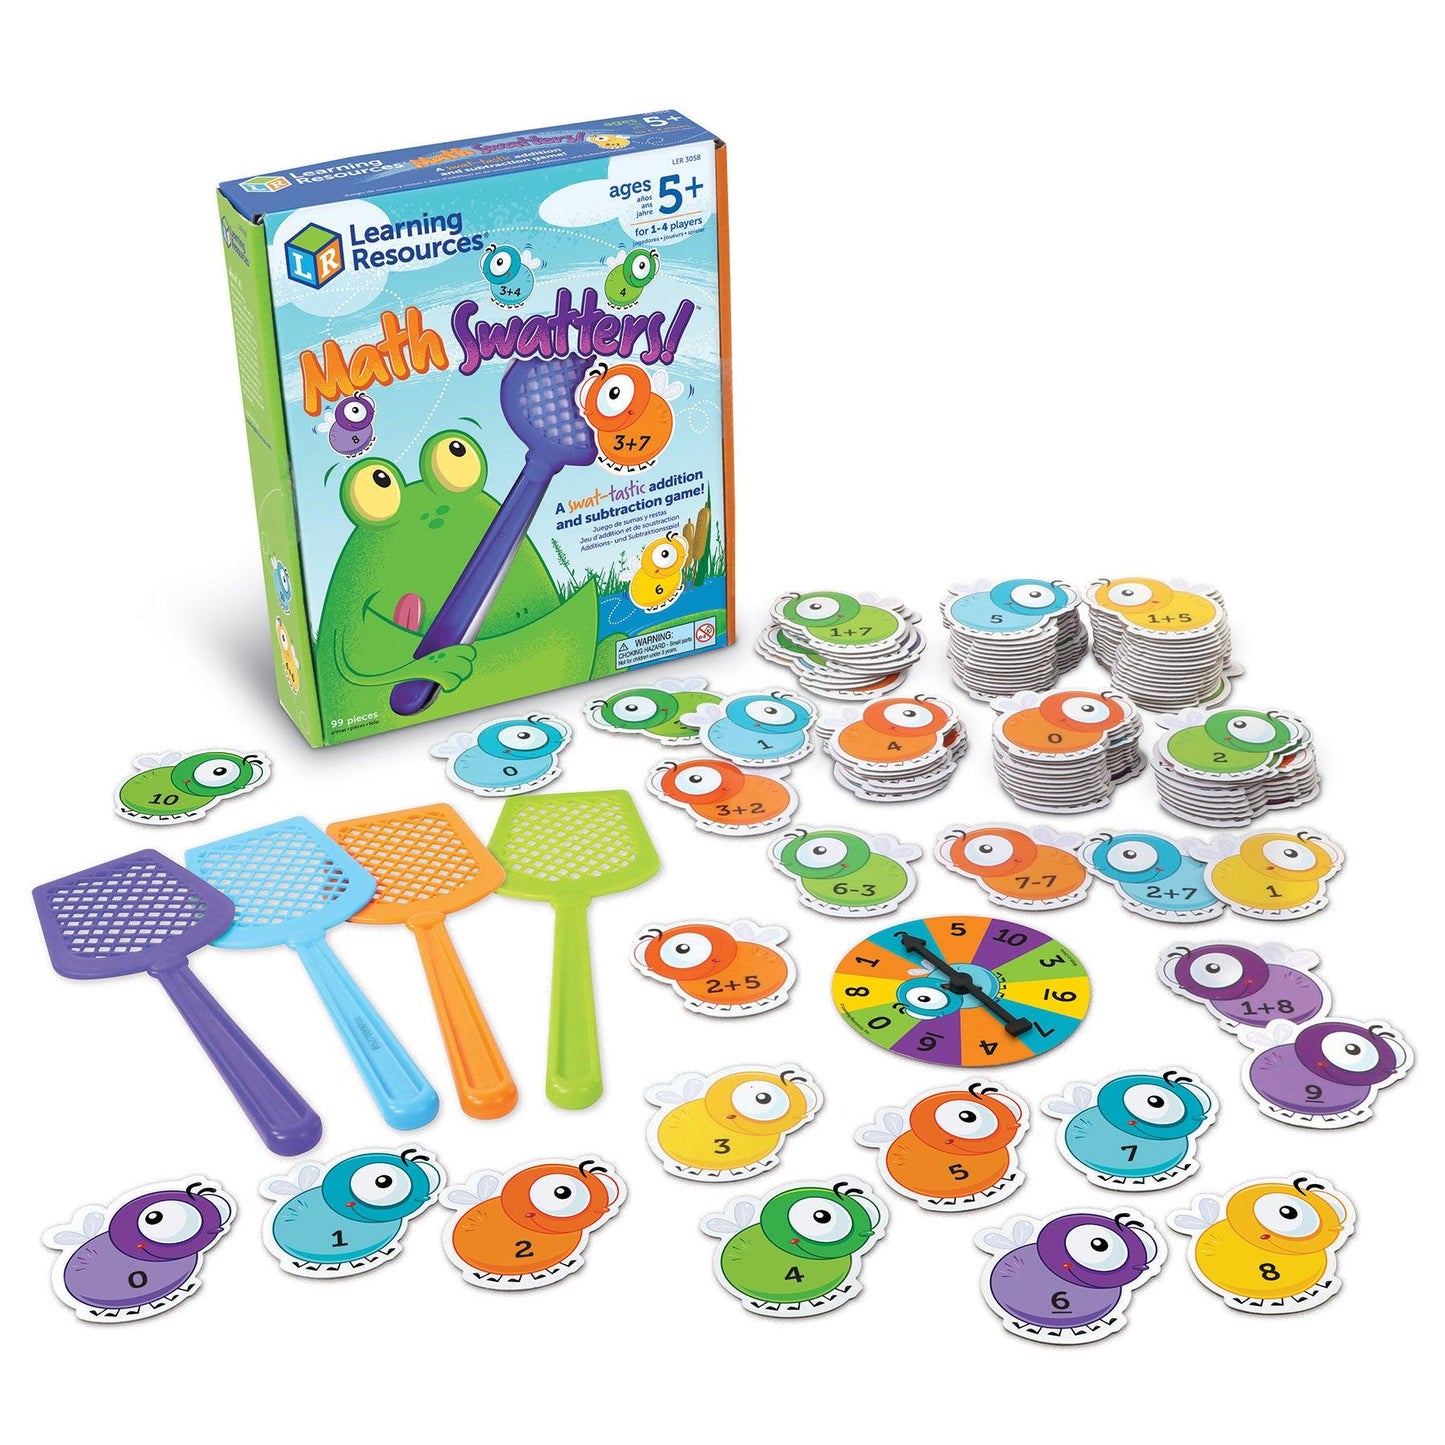 Math Swatters! Addition & Subtraction Game - Loomini